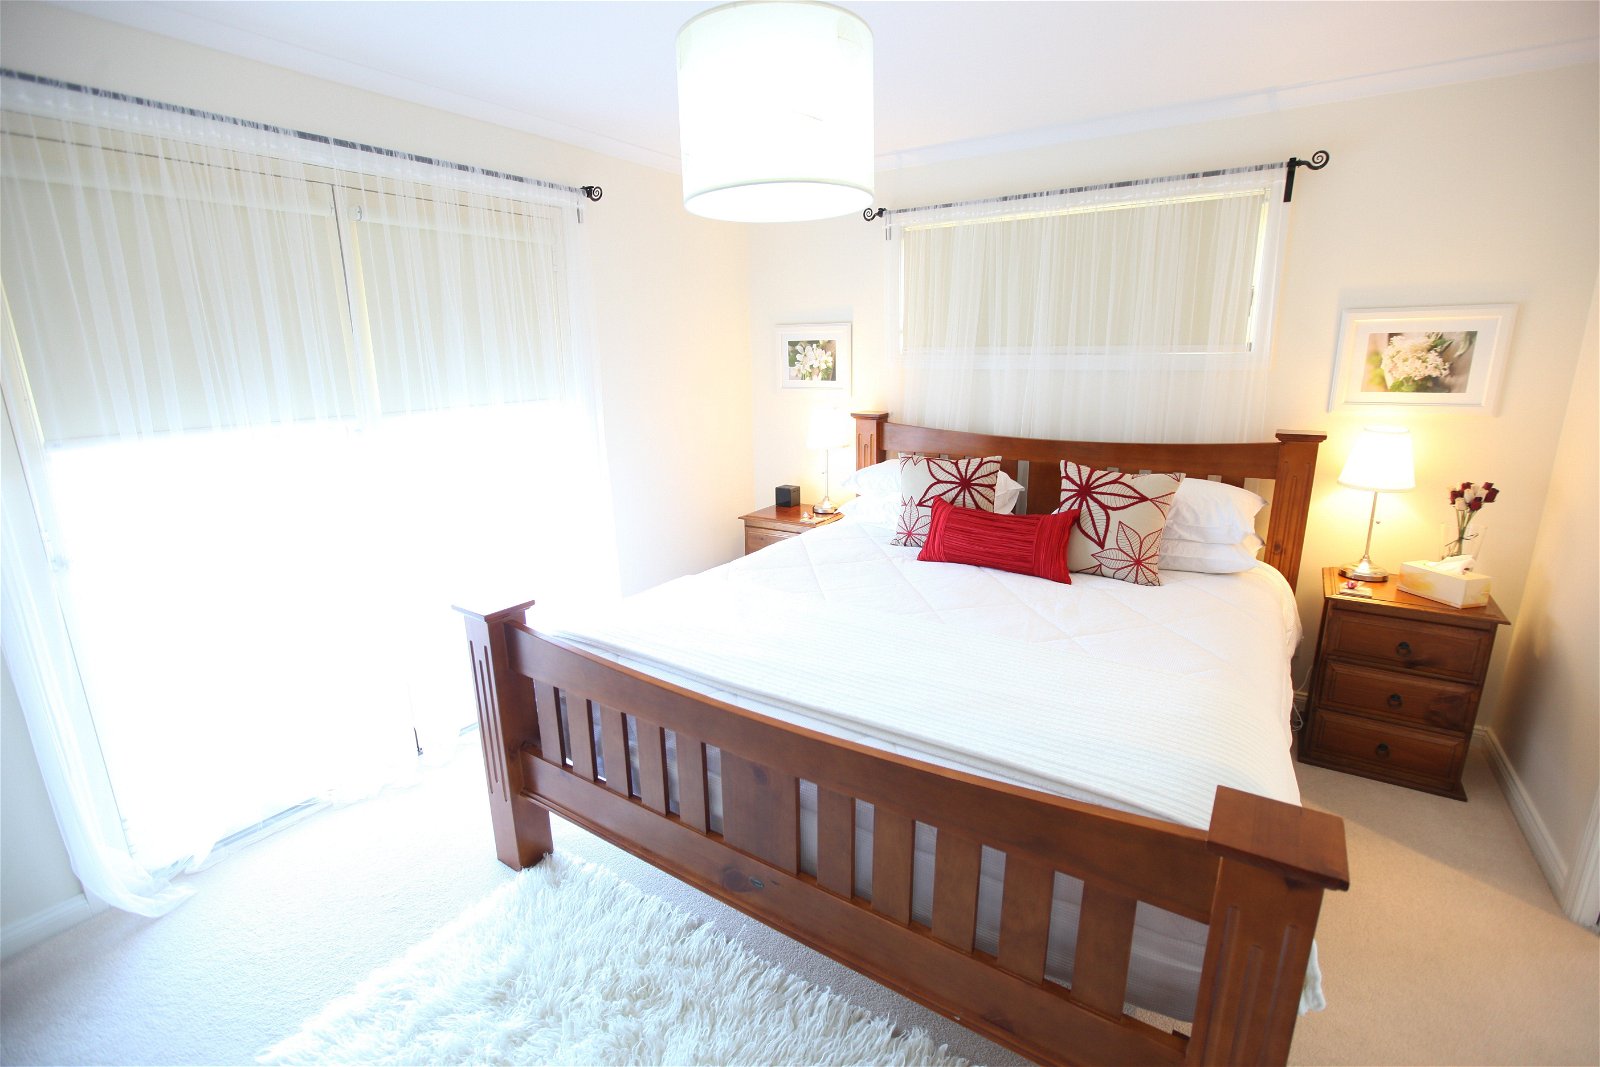 Bed And Breakfast Accommodation in Surfers Paradise